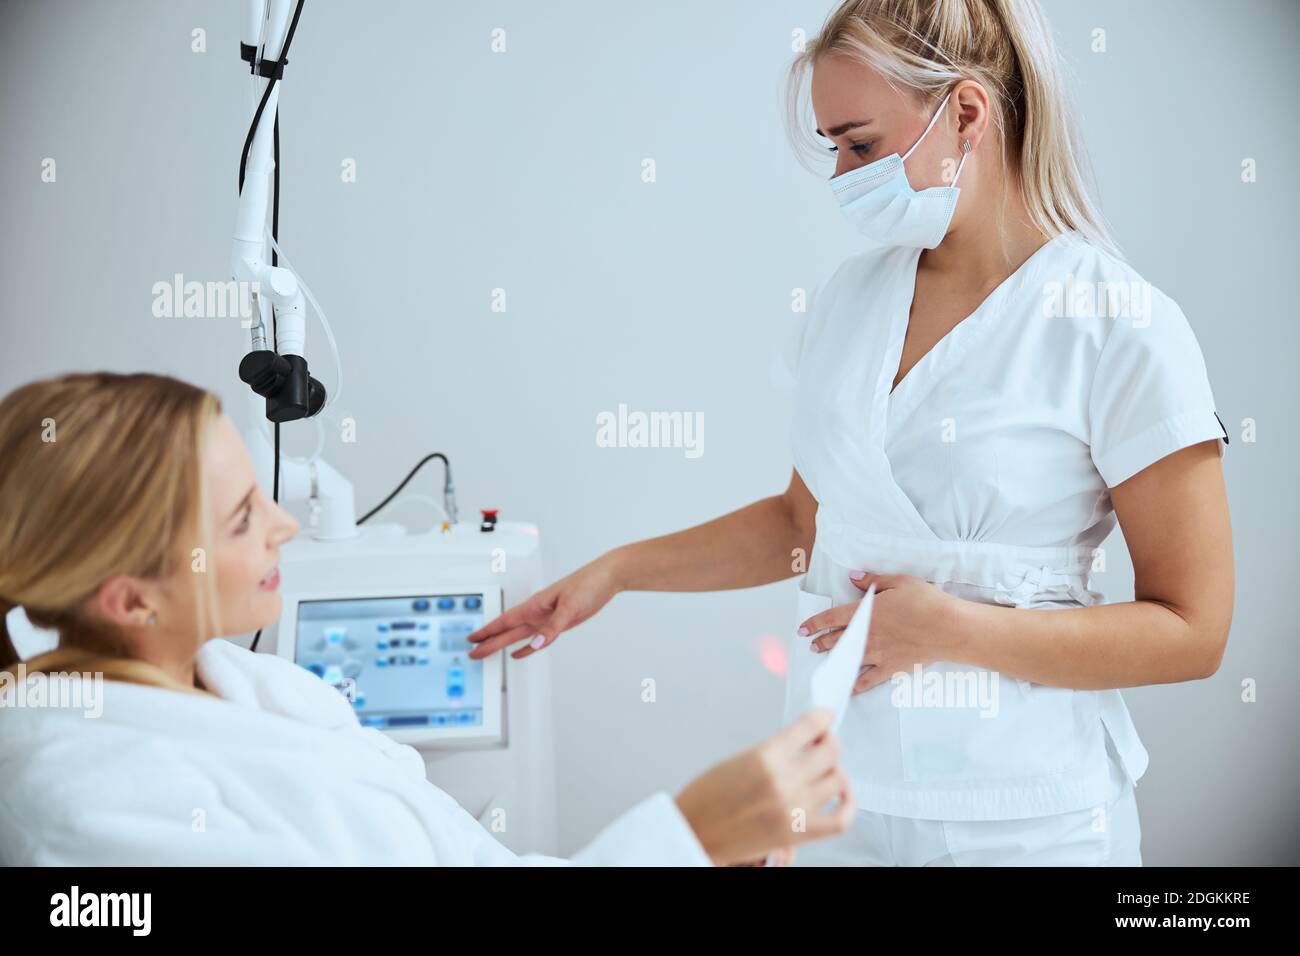 Cosmetologist and her client discussing an upcoming beauty procedure Stock Photo